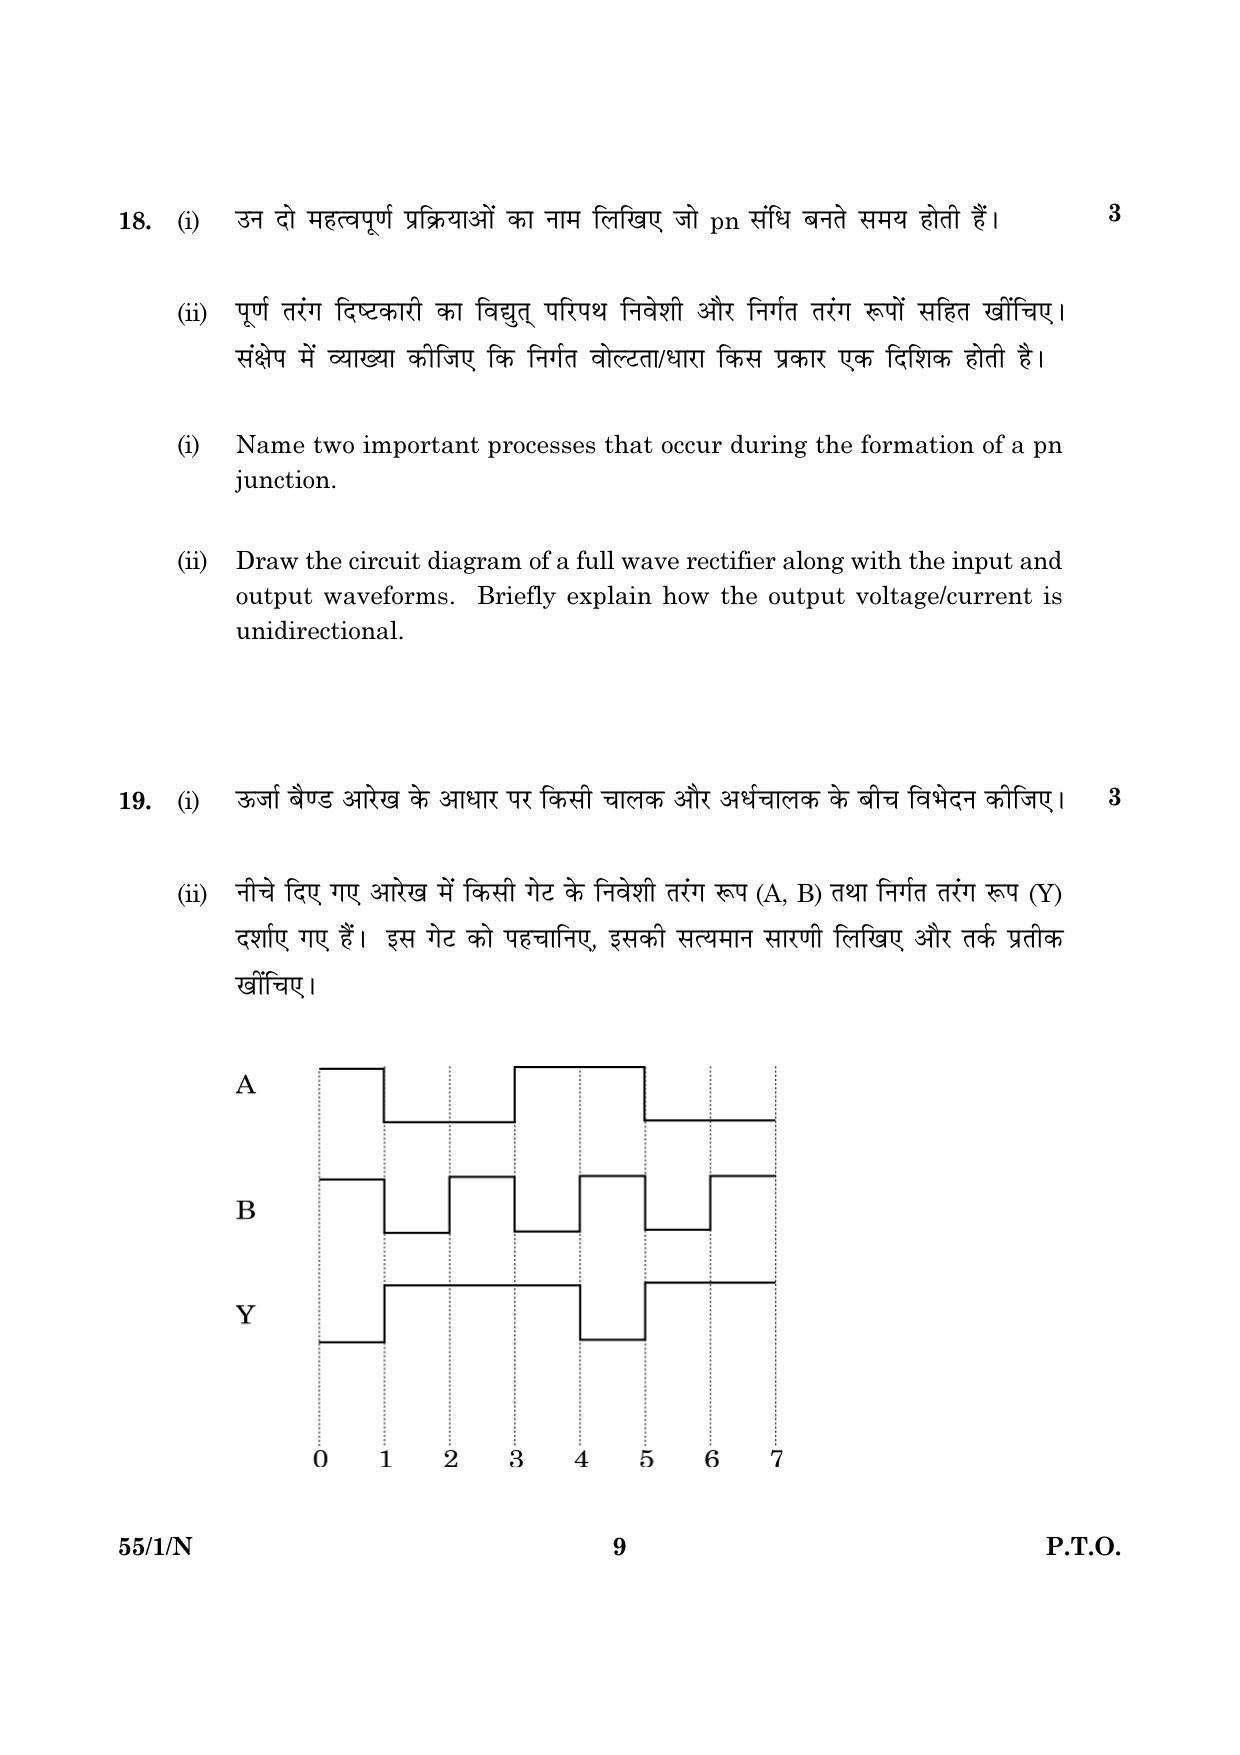 CBSE Class 12 055 Set 1 N Physics Theory 2016 Question Paper - Page 9